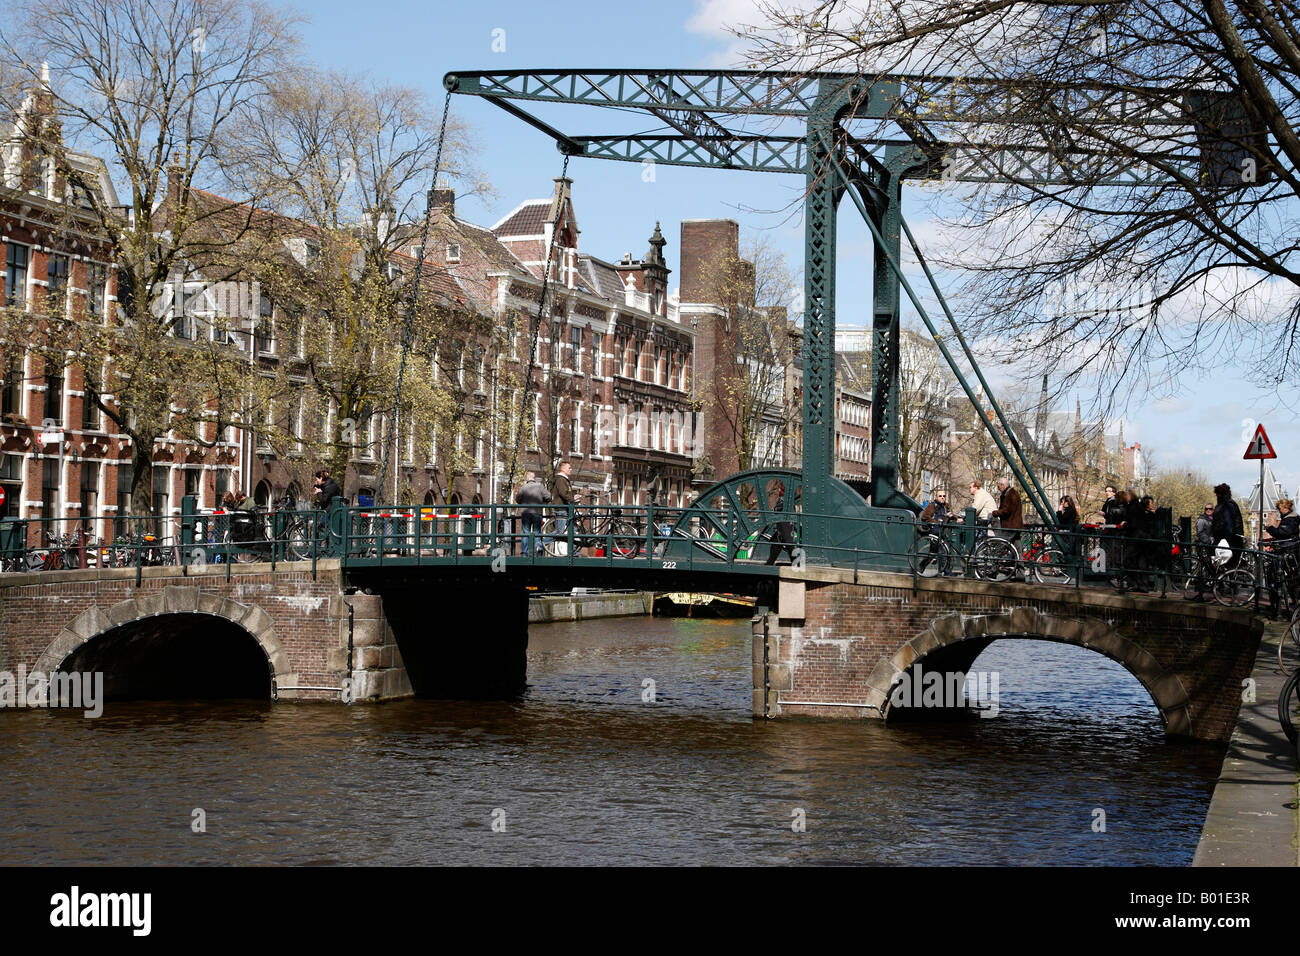 canal lift bridge over kloveniersburgwal canal within the university district amsterdam netherlands north holland europe Stock Photo